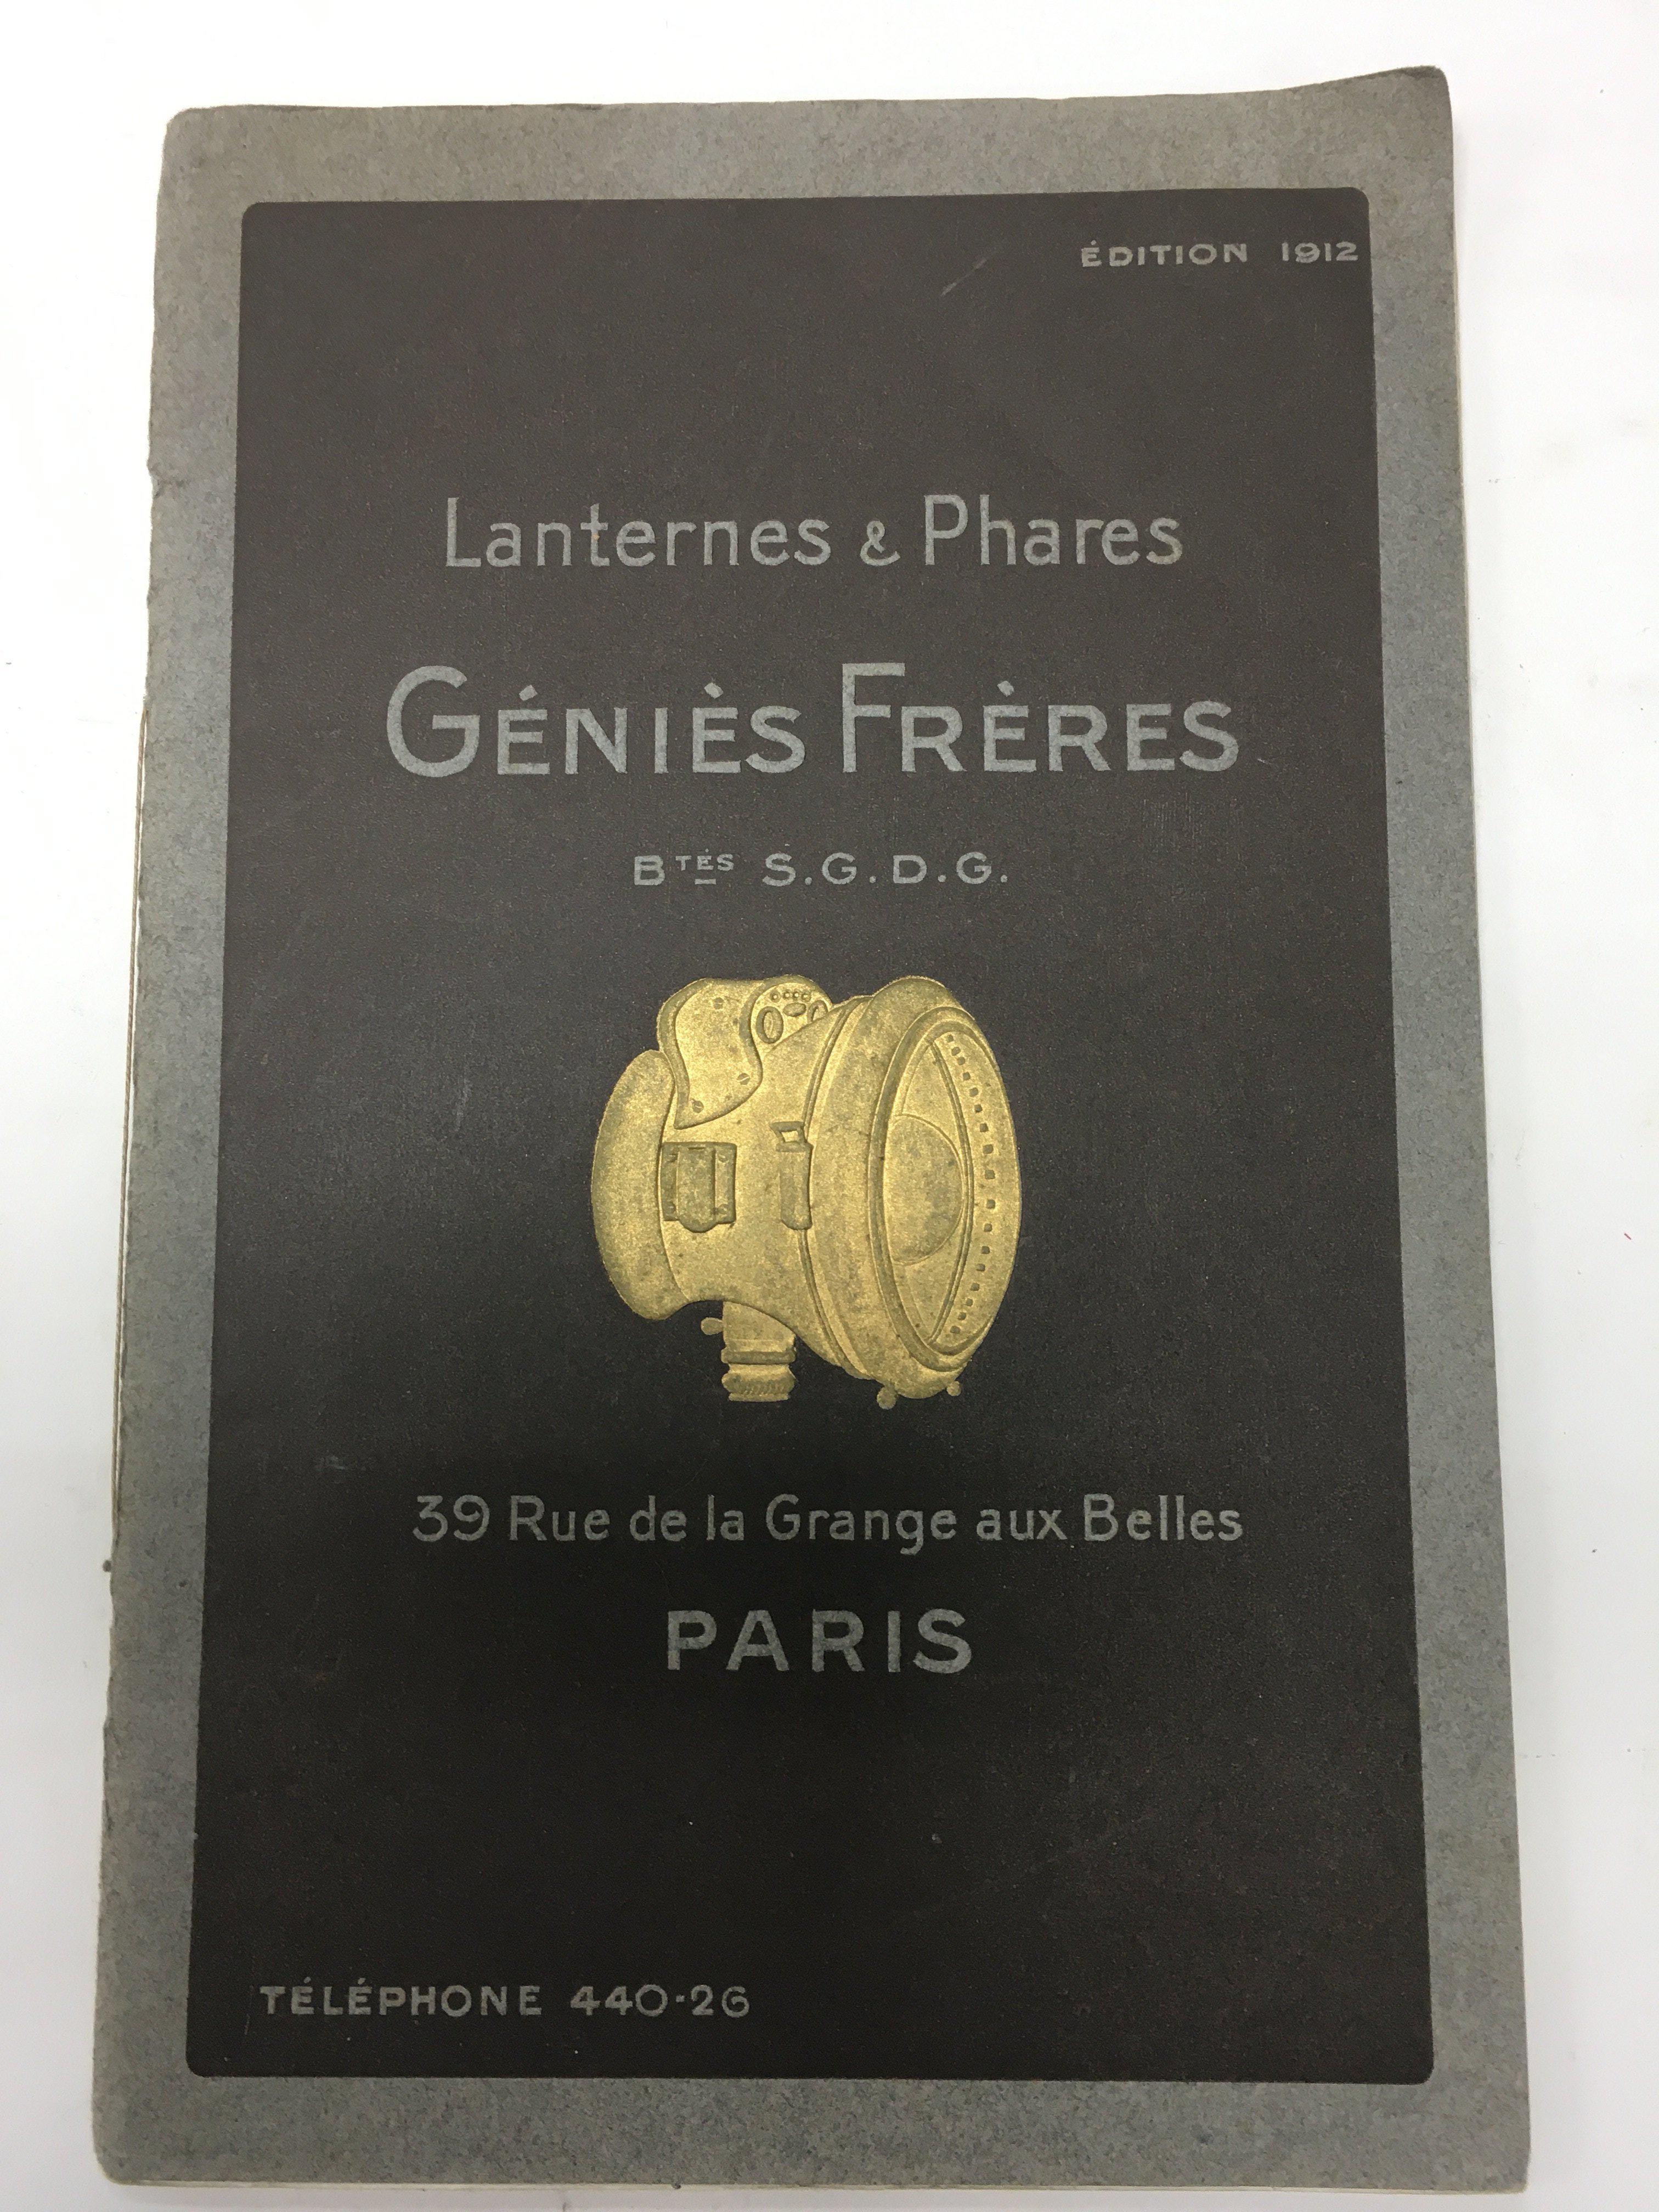 Early French pamphlet dated 1912 titled Lanternes